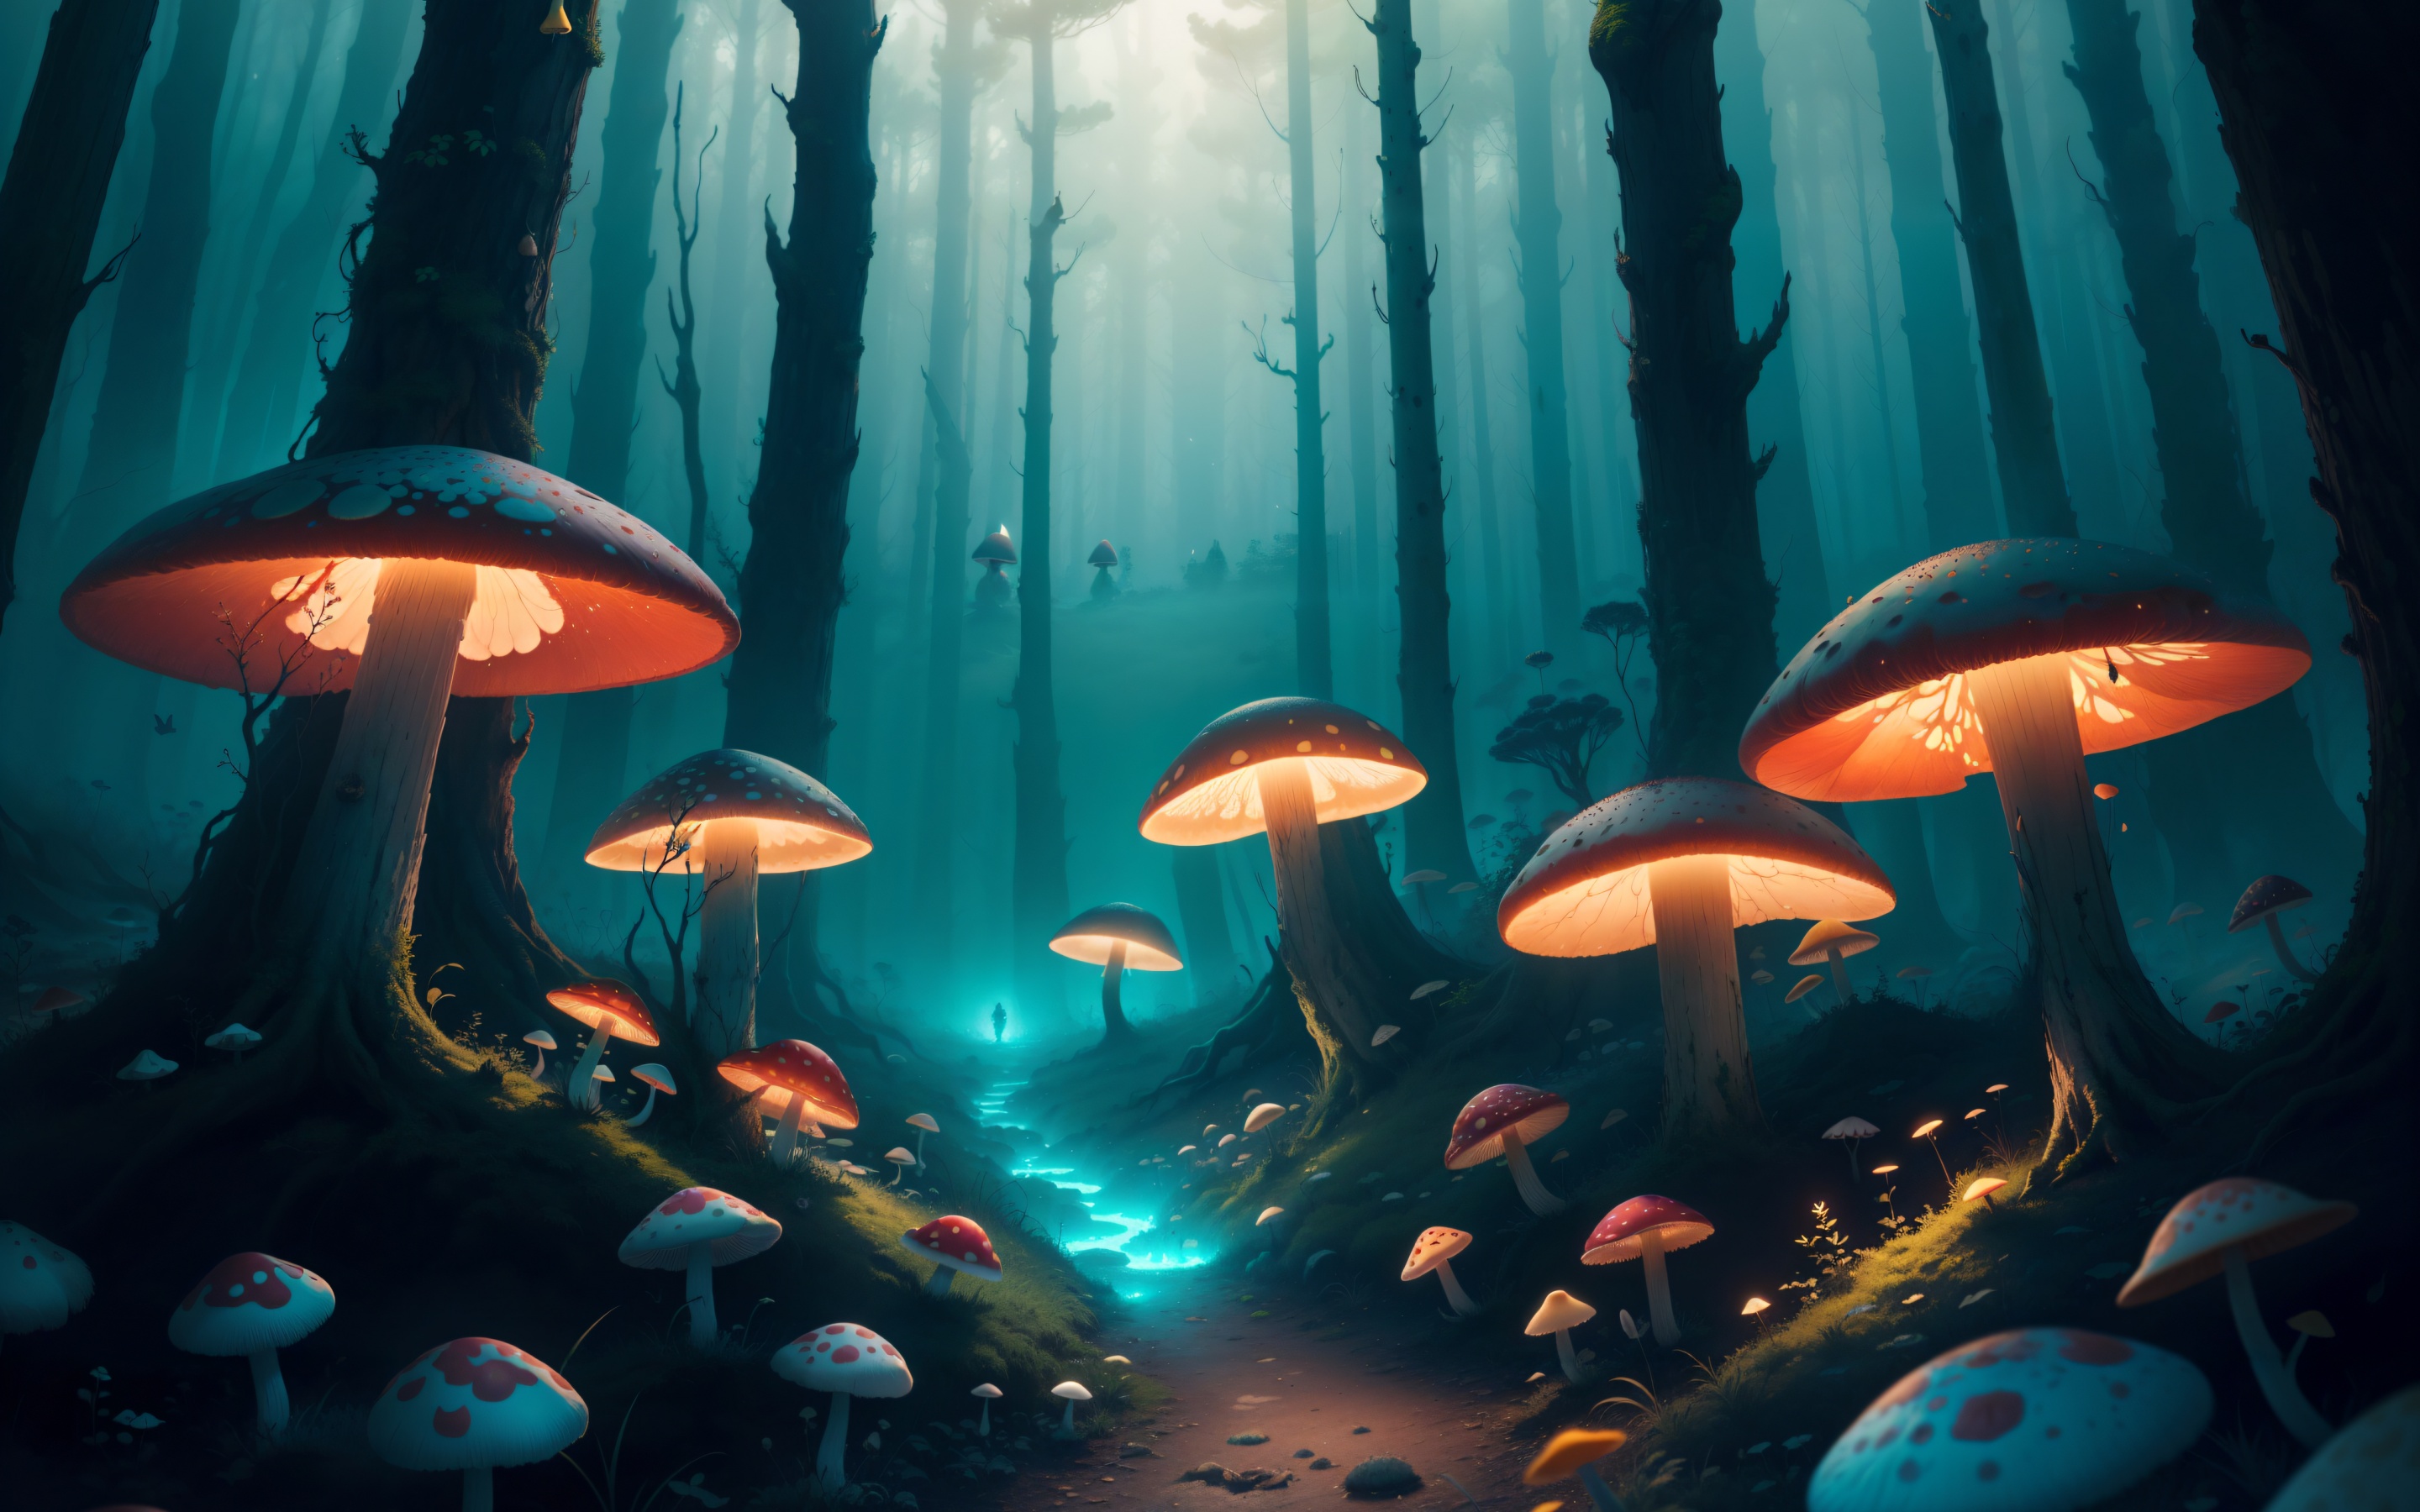 Purple and Blue Mushrooms in Fantasy Forest by Leo de Wijs